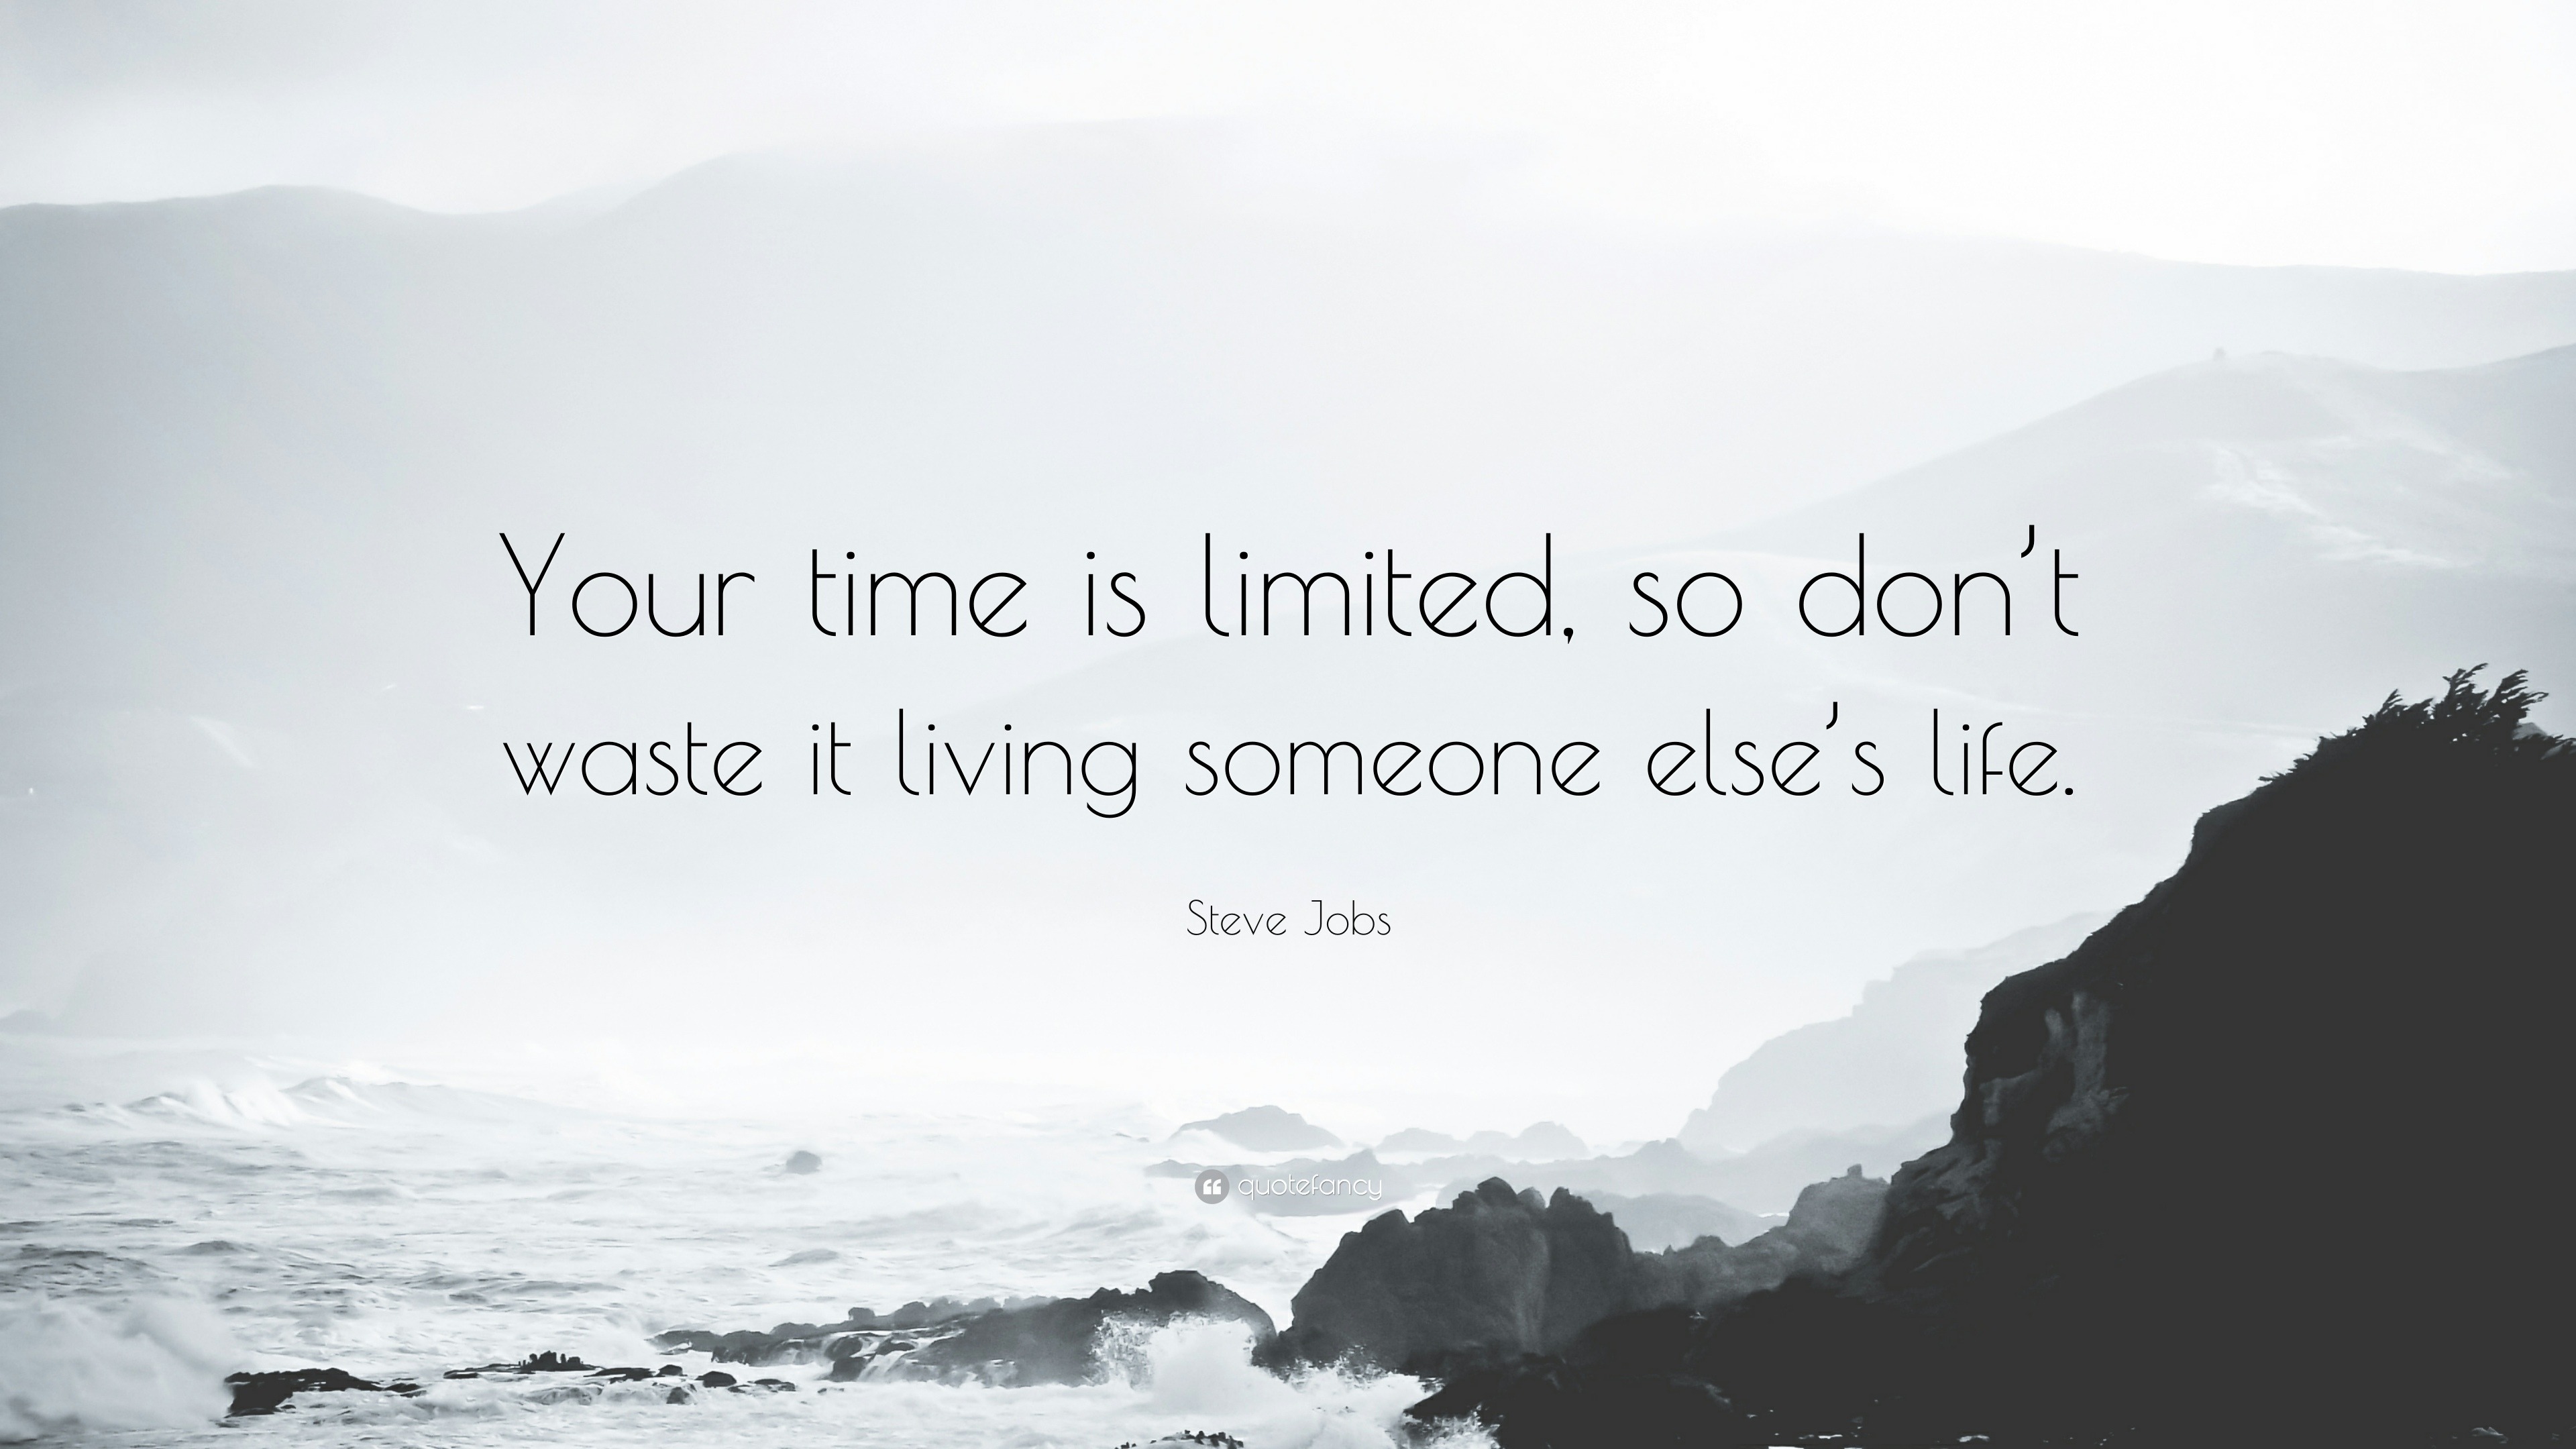 Steve Jobs Quote “Your time is limited so don t waste it